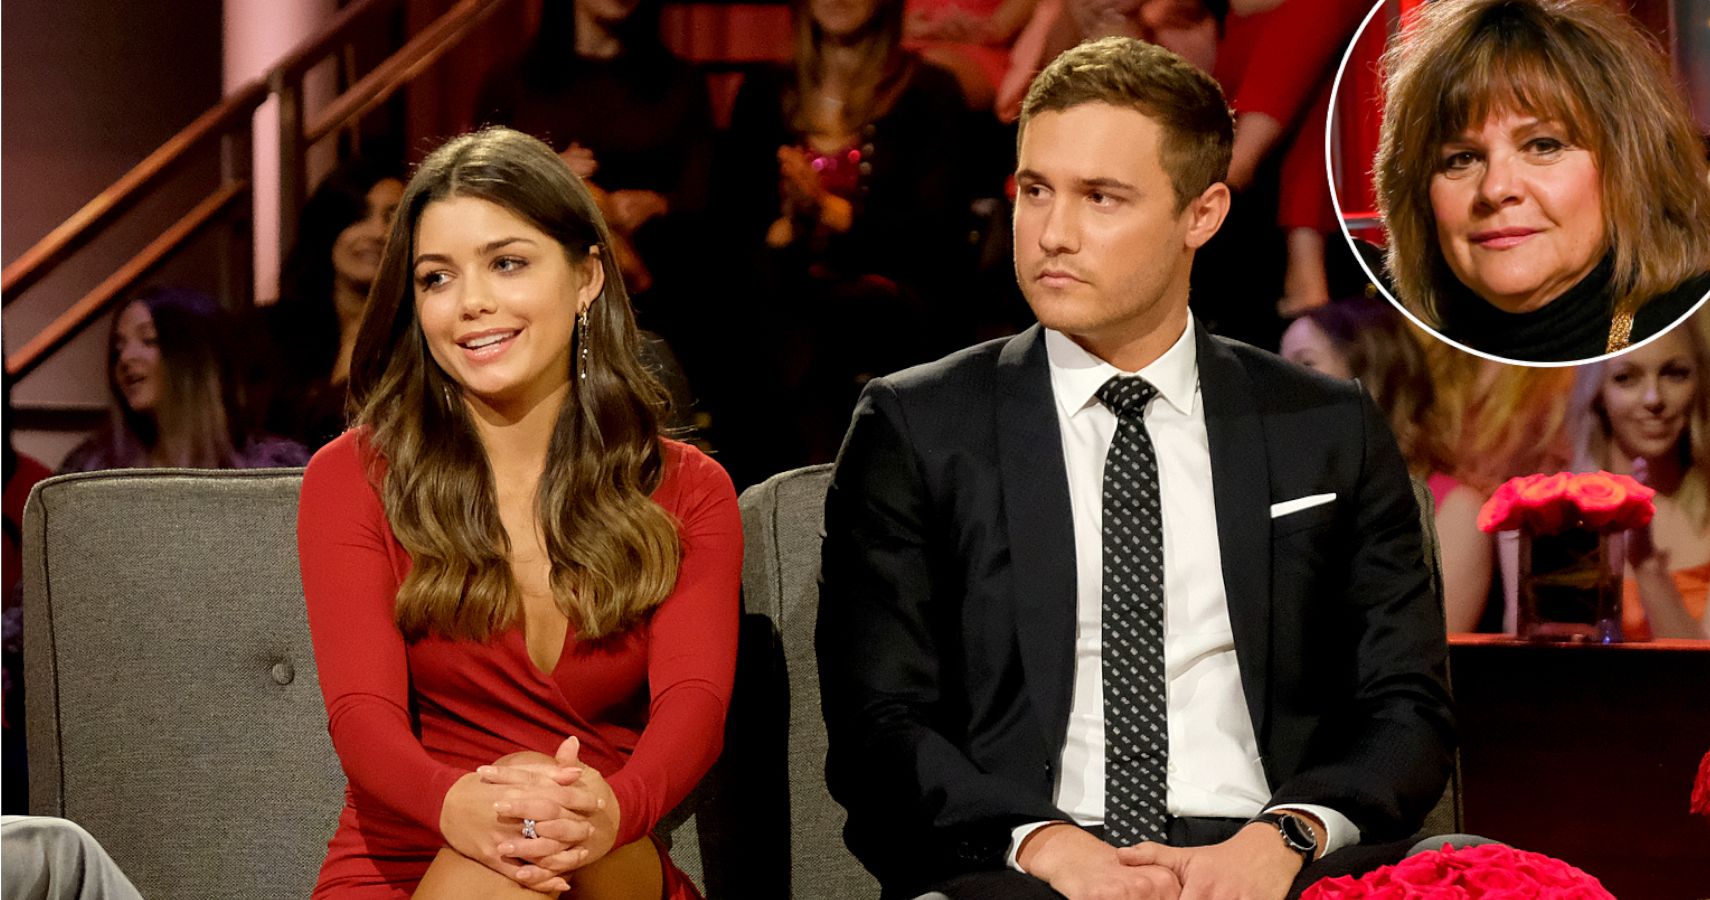 The Bachelor 2020 10 Of The Funniest Tweet Reactions To The Finale